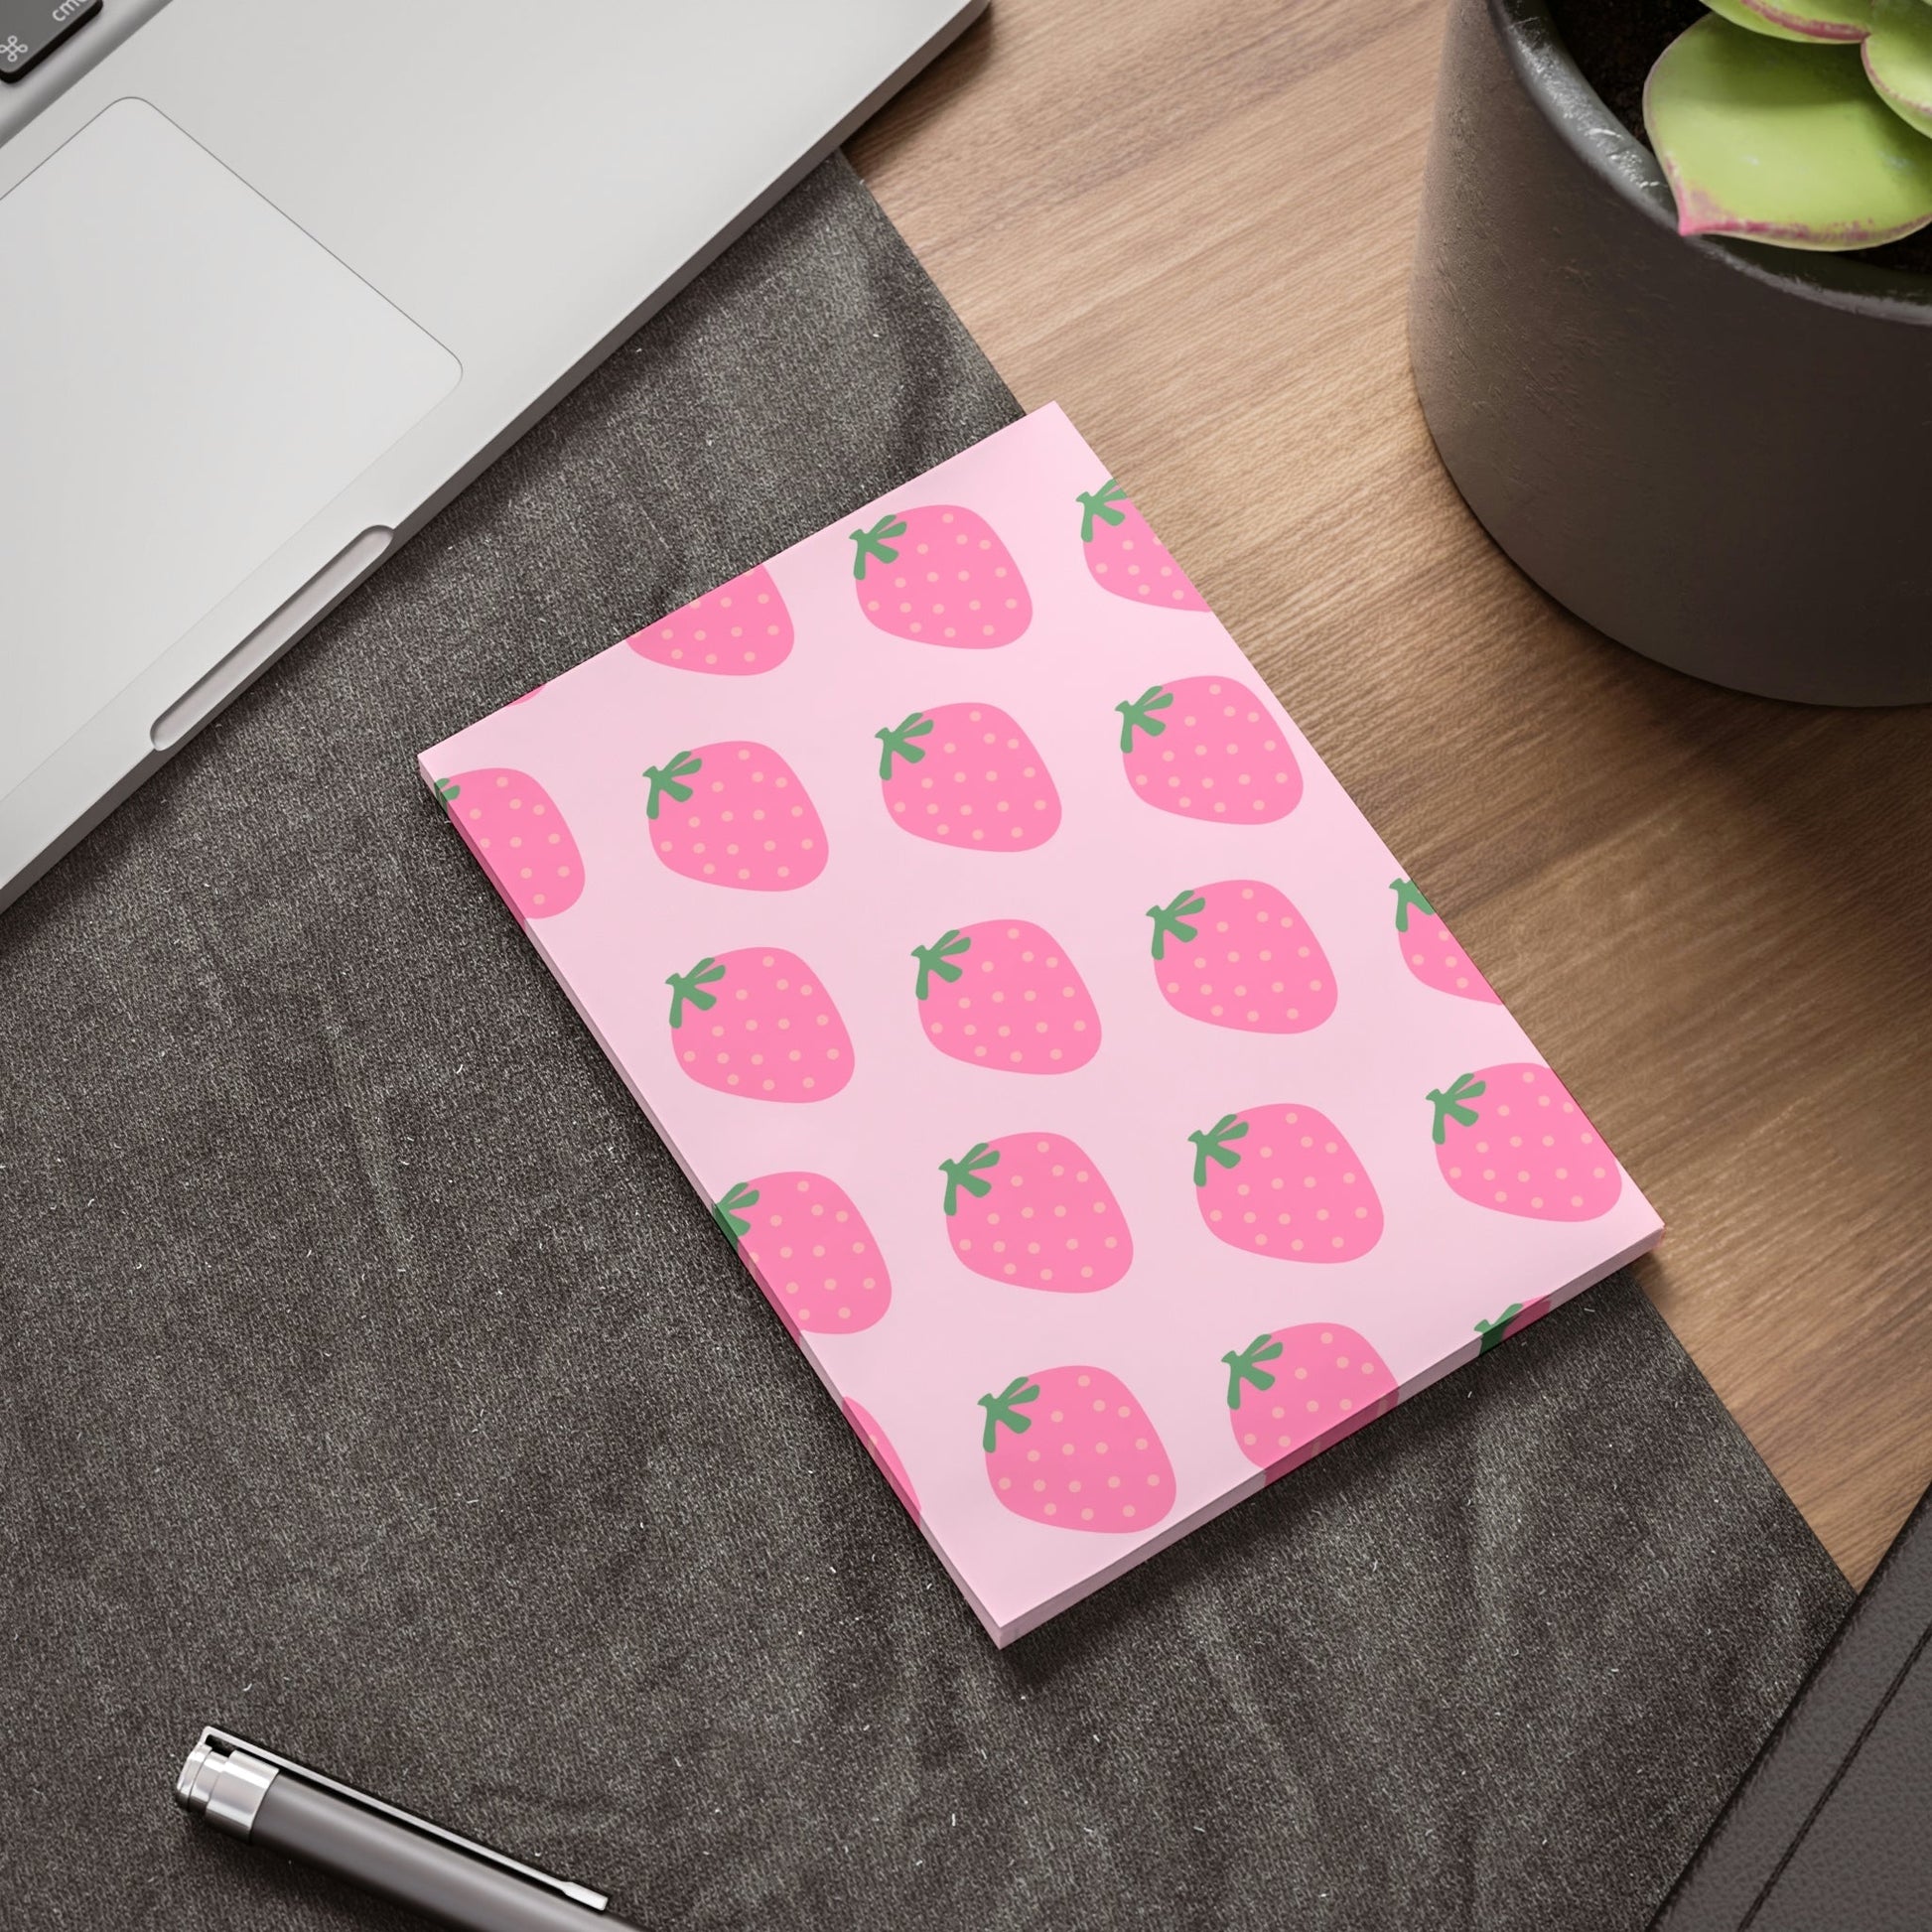 Strawberries Post-it® Note Pad Paper products Pink Sweetheart